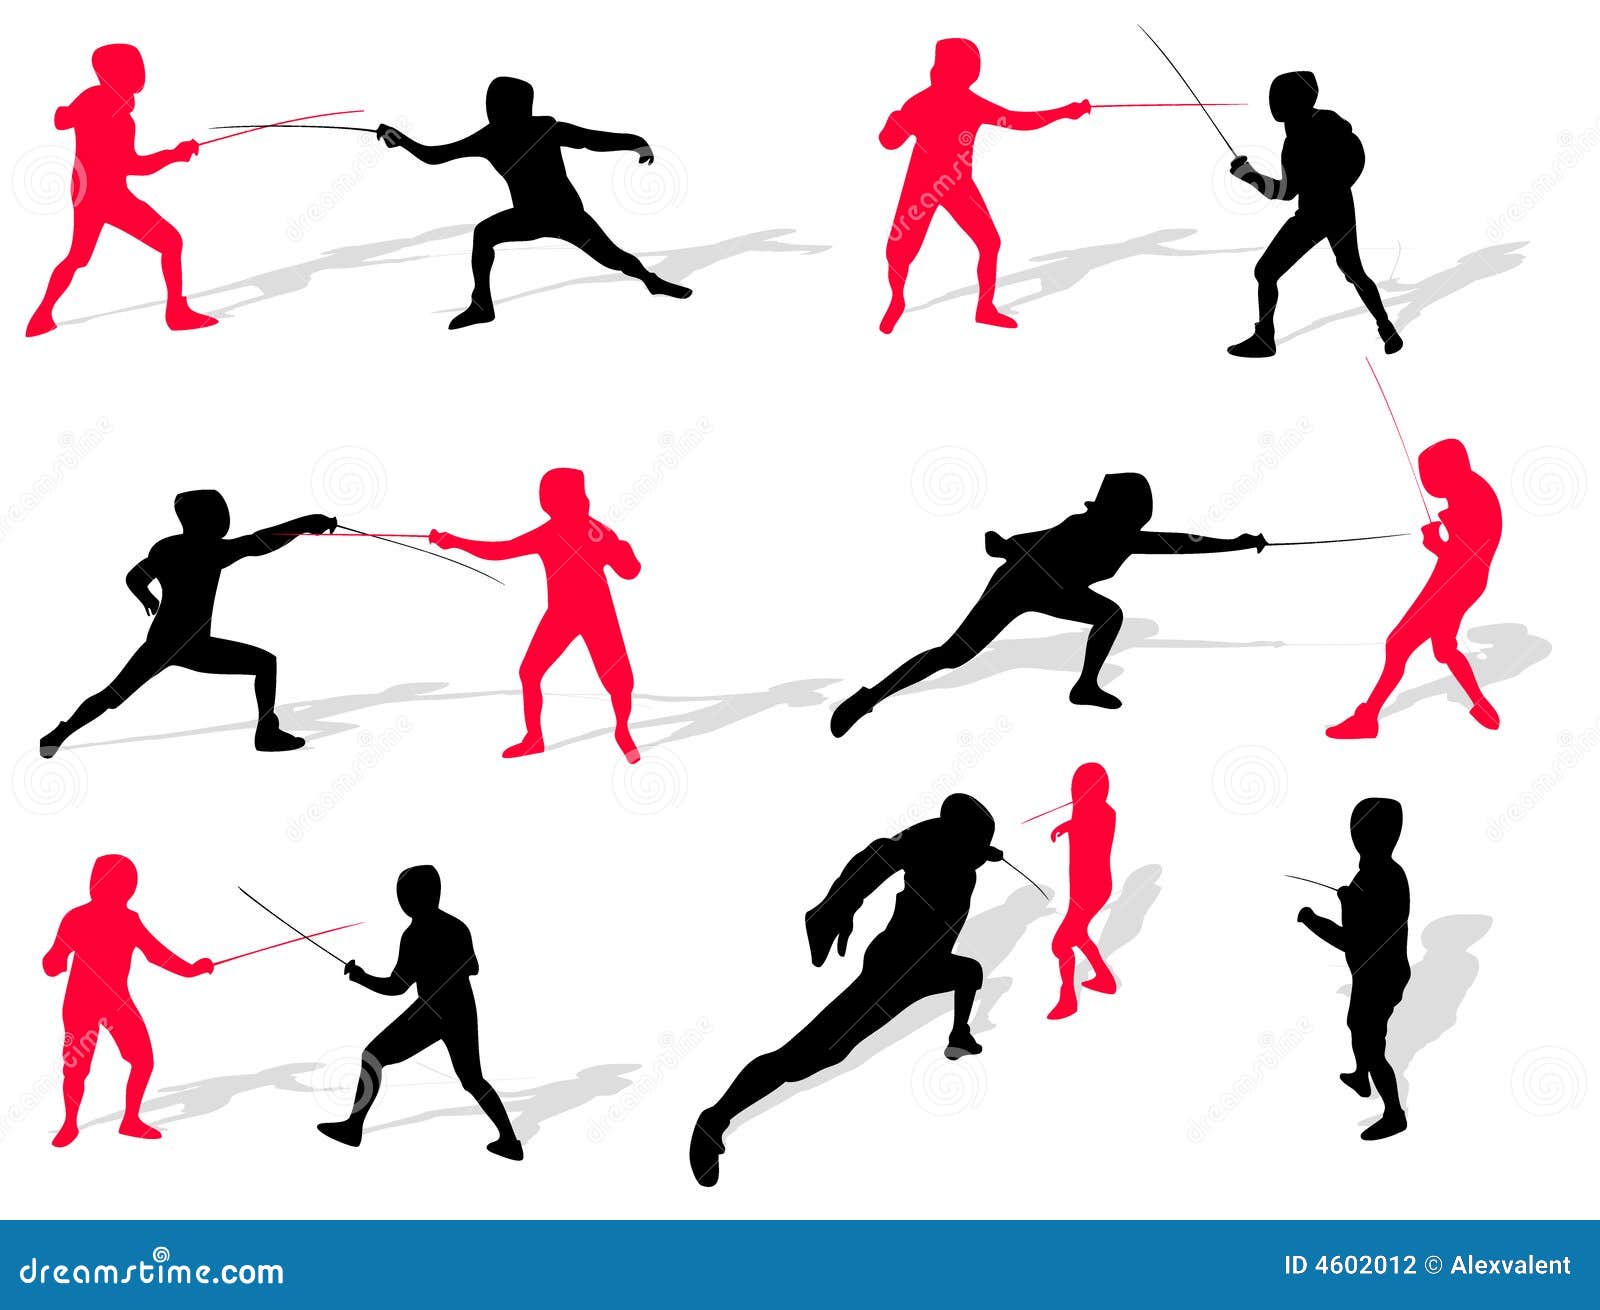 fencing people silhouettes